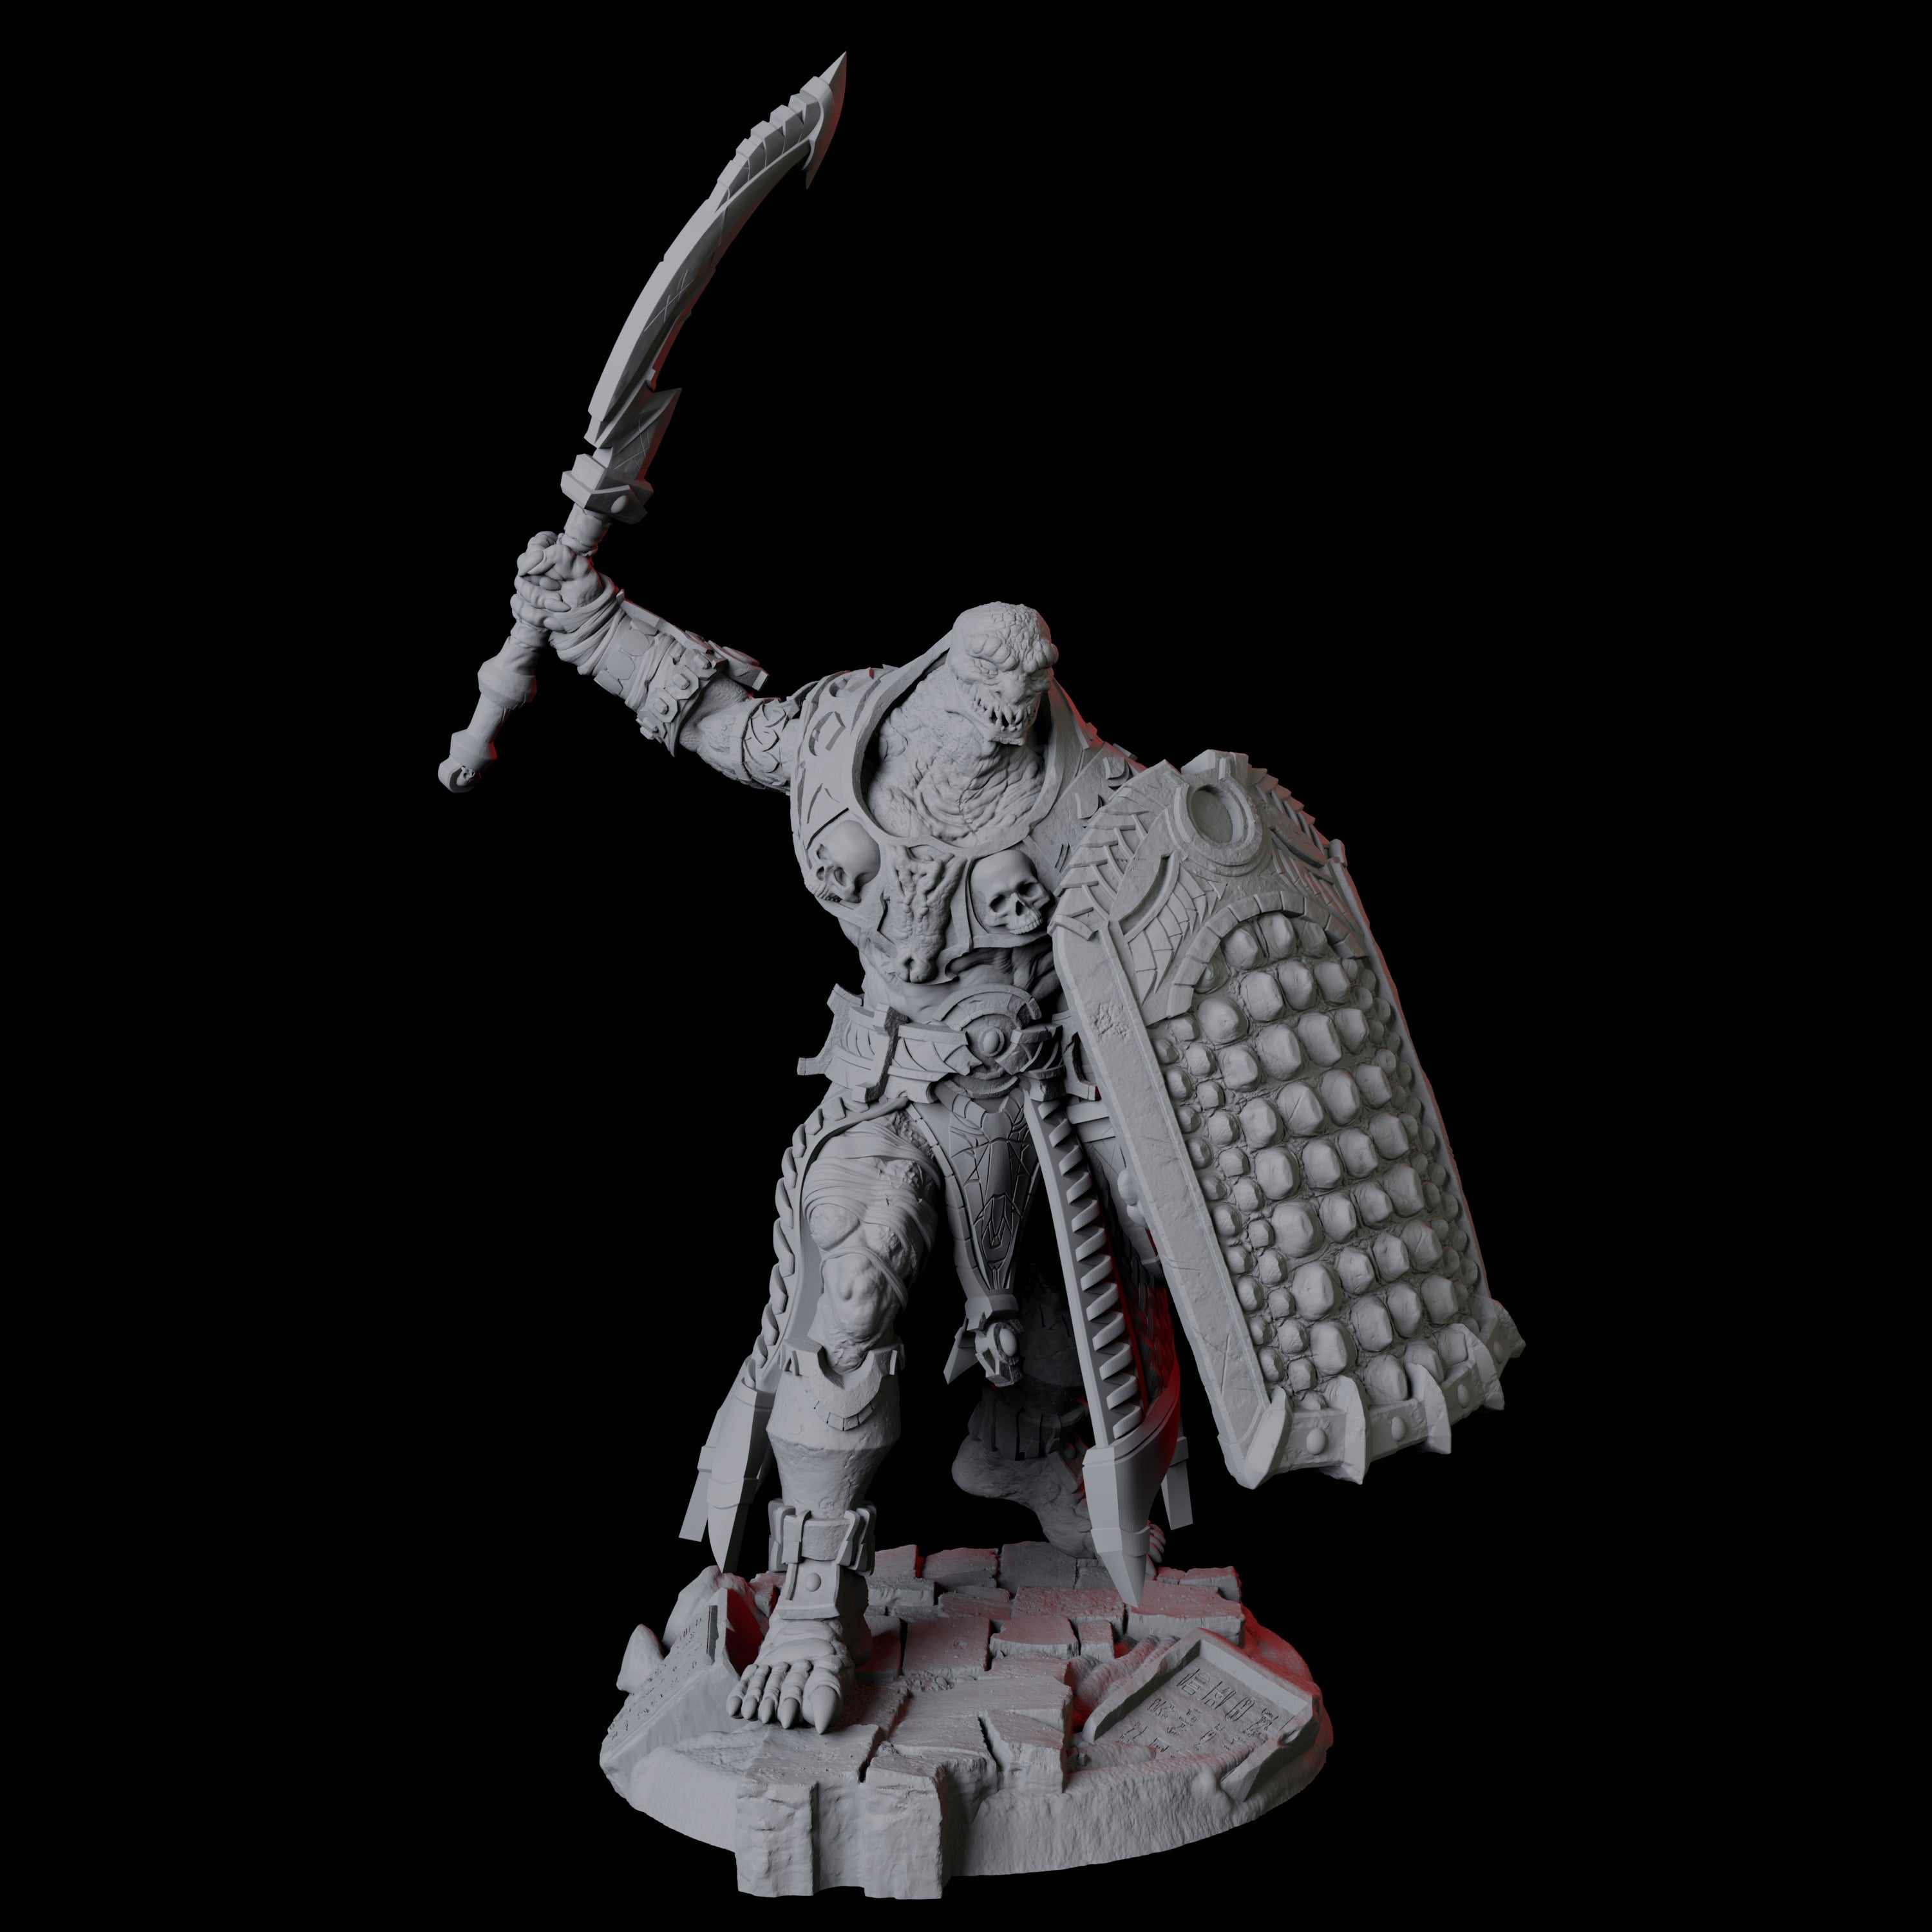 Saurian War Priest A Miniature for Dungeons and Dragons, Pathfinder or other TTRPGs